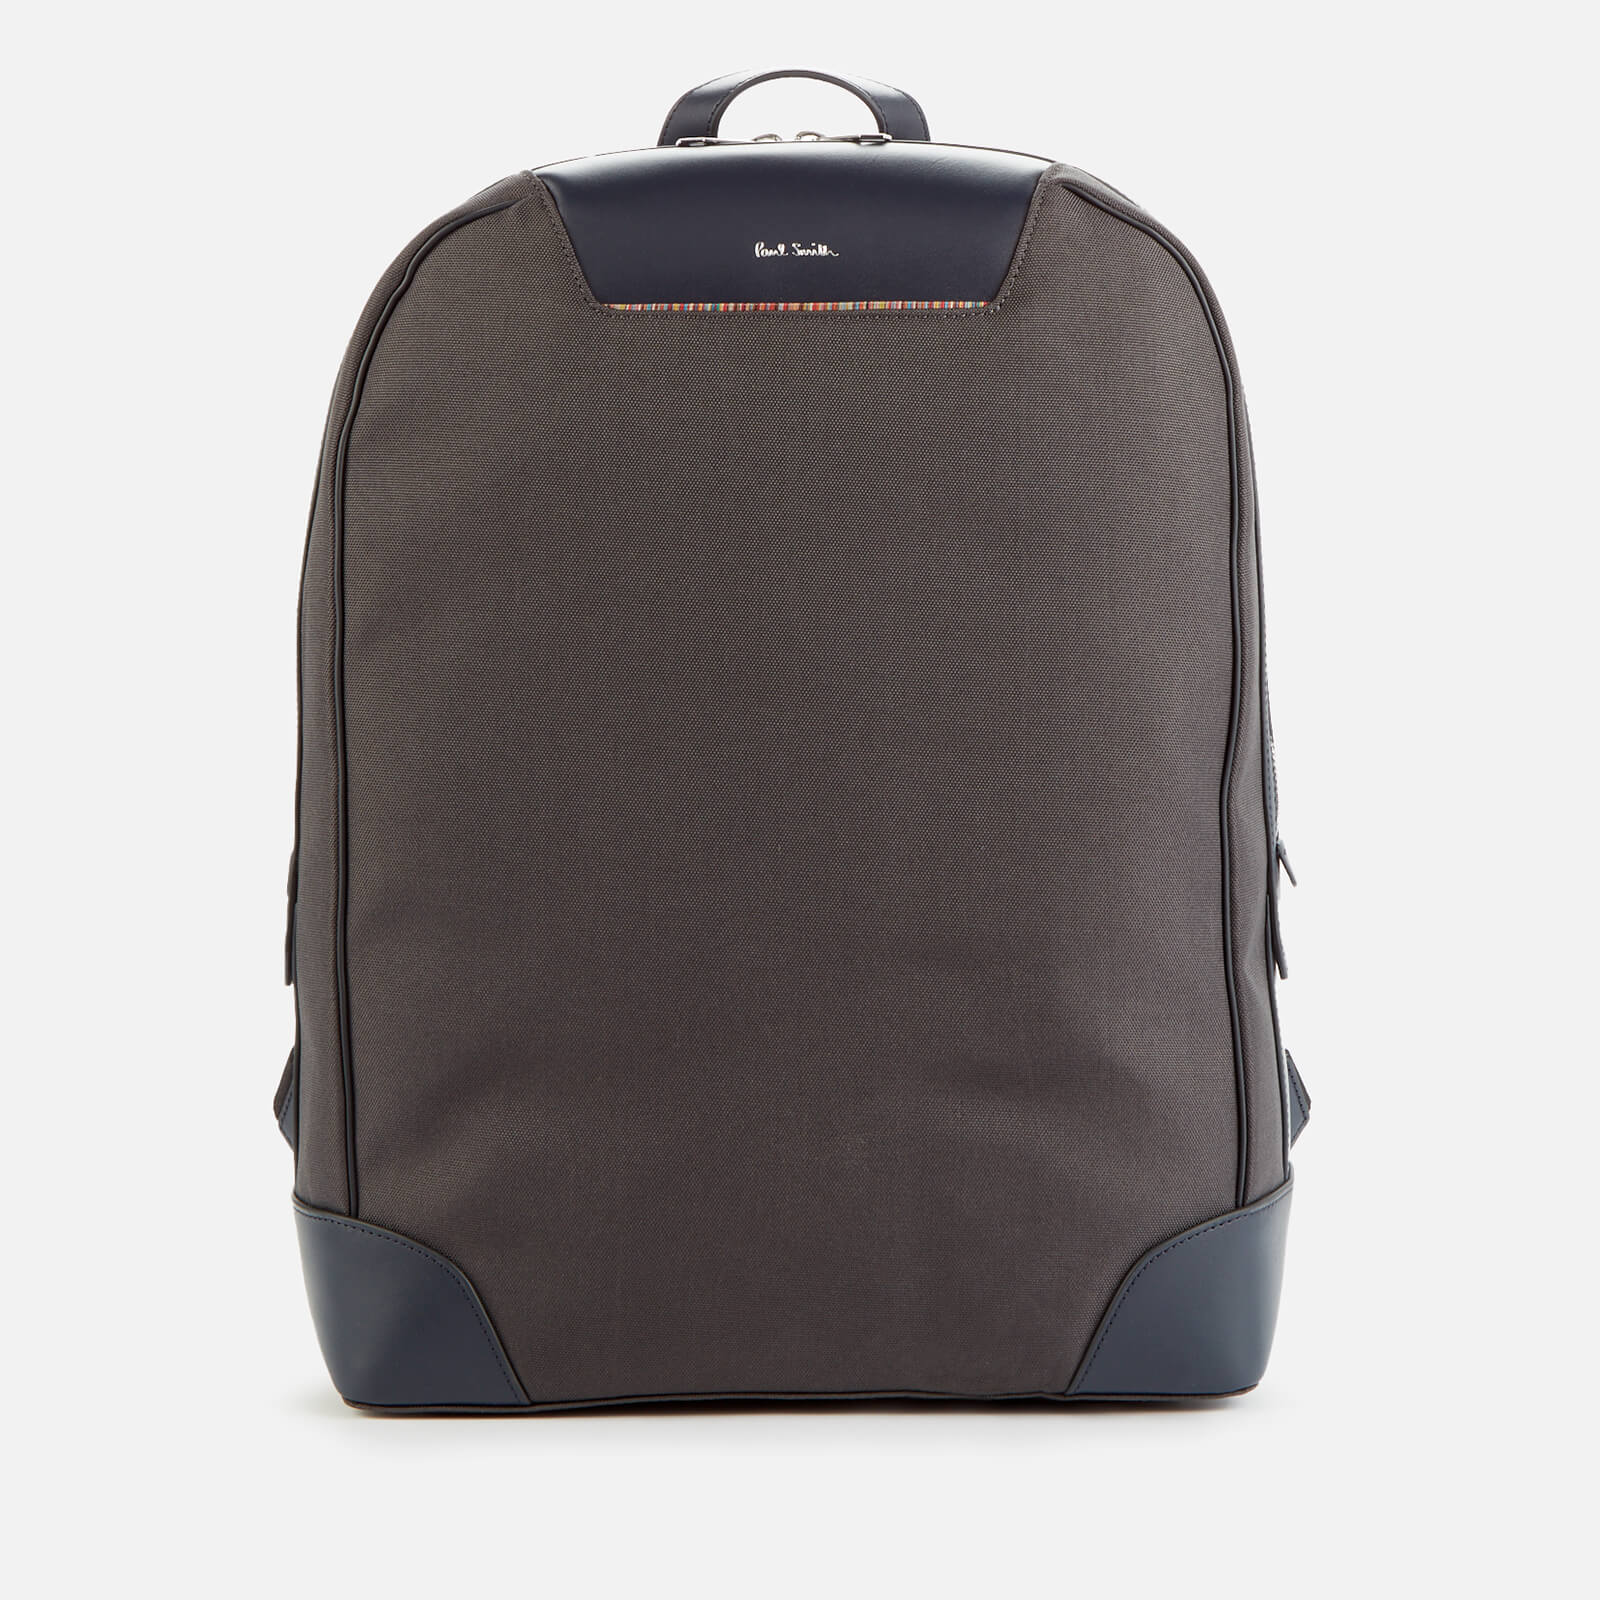 PS Paul Smith Men's Travel Backpack - Grey